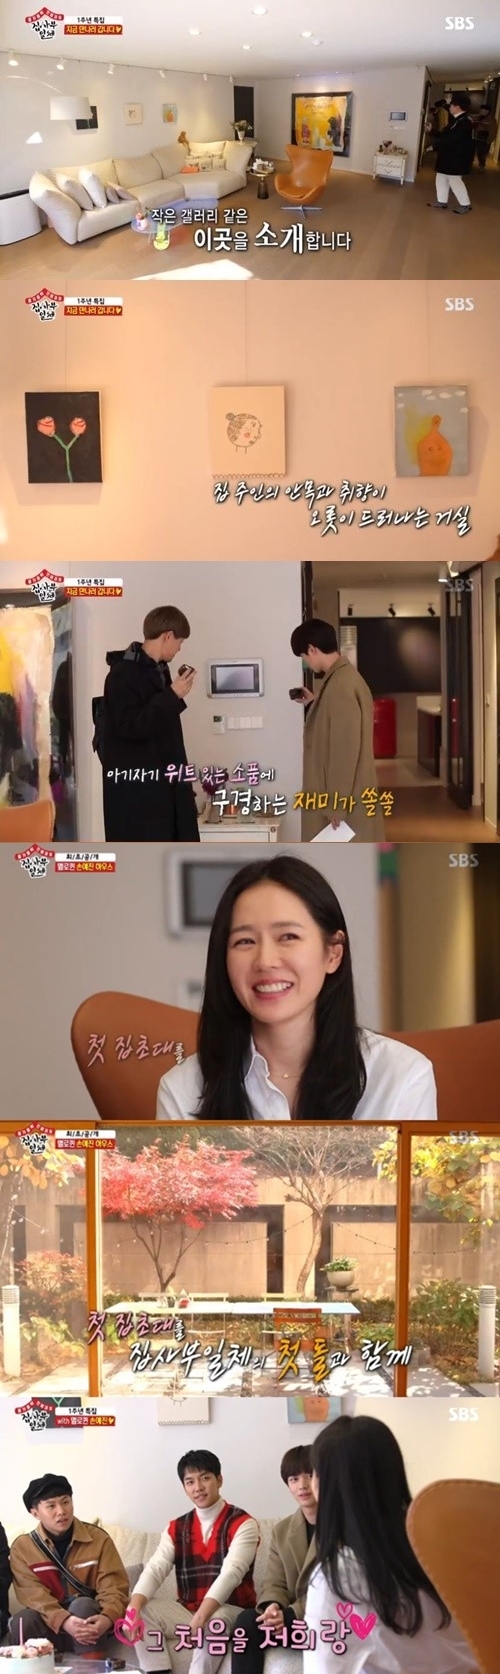 Actor Son Ye-jin has attracted attention by revealing his picturesque house full of his own senses.In the SBS entertainment program All The Butlers, which aired on the last 2 days, Lee Sang-yoon, Lee Seung-gi, Yang Se-hyeong and Yook Sungjae were released leaving a special MT with actor Son Ye-jin, who appeared as surprise MT planners for the first anniversary.On this day, the members had their first meeting with her at the House of Son Ye-jin.Son Ye-jins house had a subtle scent from the entrance with the incense candle on, and the members could not hide their excitement.The members said, It is the first time I have filmed in House, and I decided that it is a fun program.The first house of Son Ye-jin to be released was like a gallery; white-toned Interiors were neat and luxurious.From the entrance, there was a picture showing the taste of Son Ye-jin all over the house, and it was like a gallery.I also liked flowers, and the flower decorations placed in the house were well suited to my pretty sister Son Ye-jin. It was a table that gives different colors according to the angle, and it was also felt in one prop such as a unique design watch.Yang Se-hyeong said, House is so beautifully decorated.I have to take pictures, he said, and Yook Sungjae also said, I think you have an artistic sense. The living room was not the only one that brought the members living room. On one side of the house was a picturesque Terio Star.The small, ever-sunning Terio Star boasted a picture-like landscape.In addition, the kitchen where Son Ye-jin did his own interiors showed a modern yet chic charm with a combination of black and white.The unique design of the tableware, which occupies one wall, was also enough to impress.Members of the House Interiors, which has a strong sense of Son Ye-jin, have not been able to hide their intense reaction.On the other hand, All The Butlers, which was the first public topic of Son Ye-jins House, ranked first in the same time zone with 12.1% (Nilson Korea, national standards).Photos  capture SBS broadcast screen